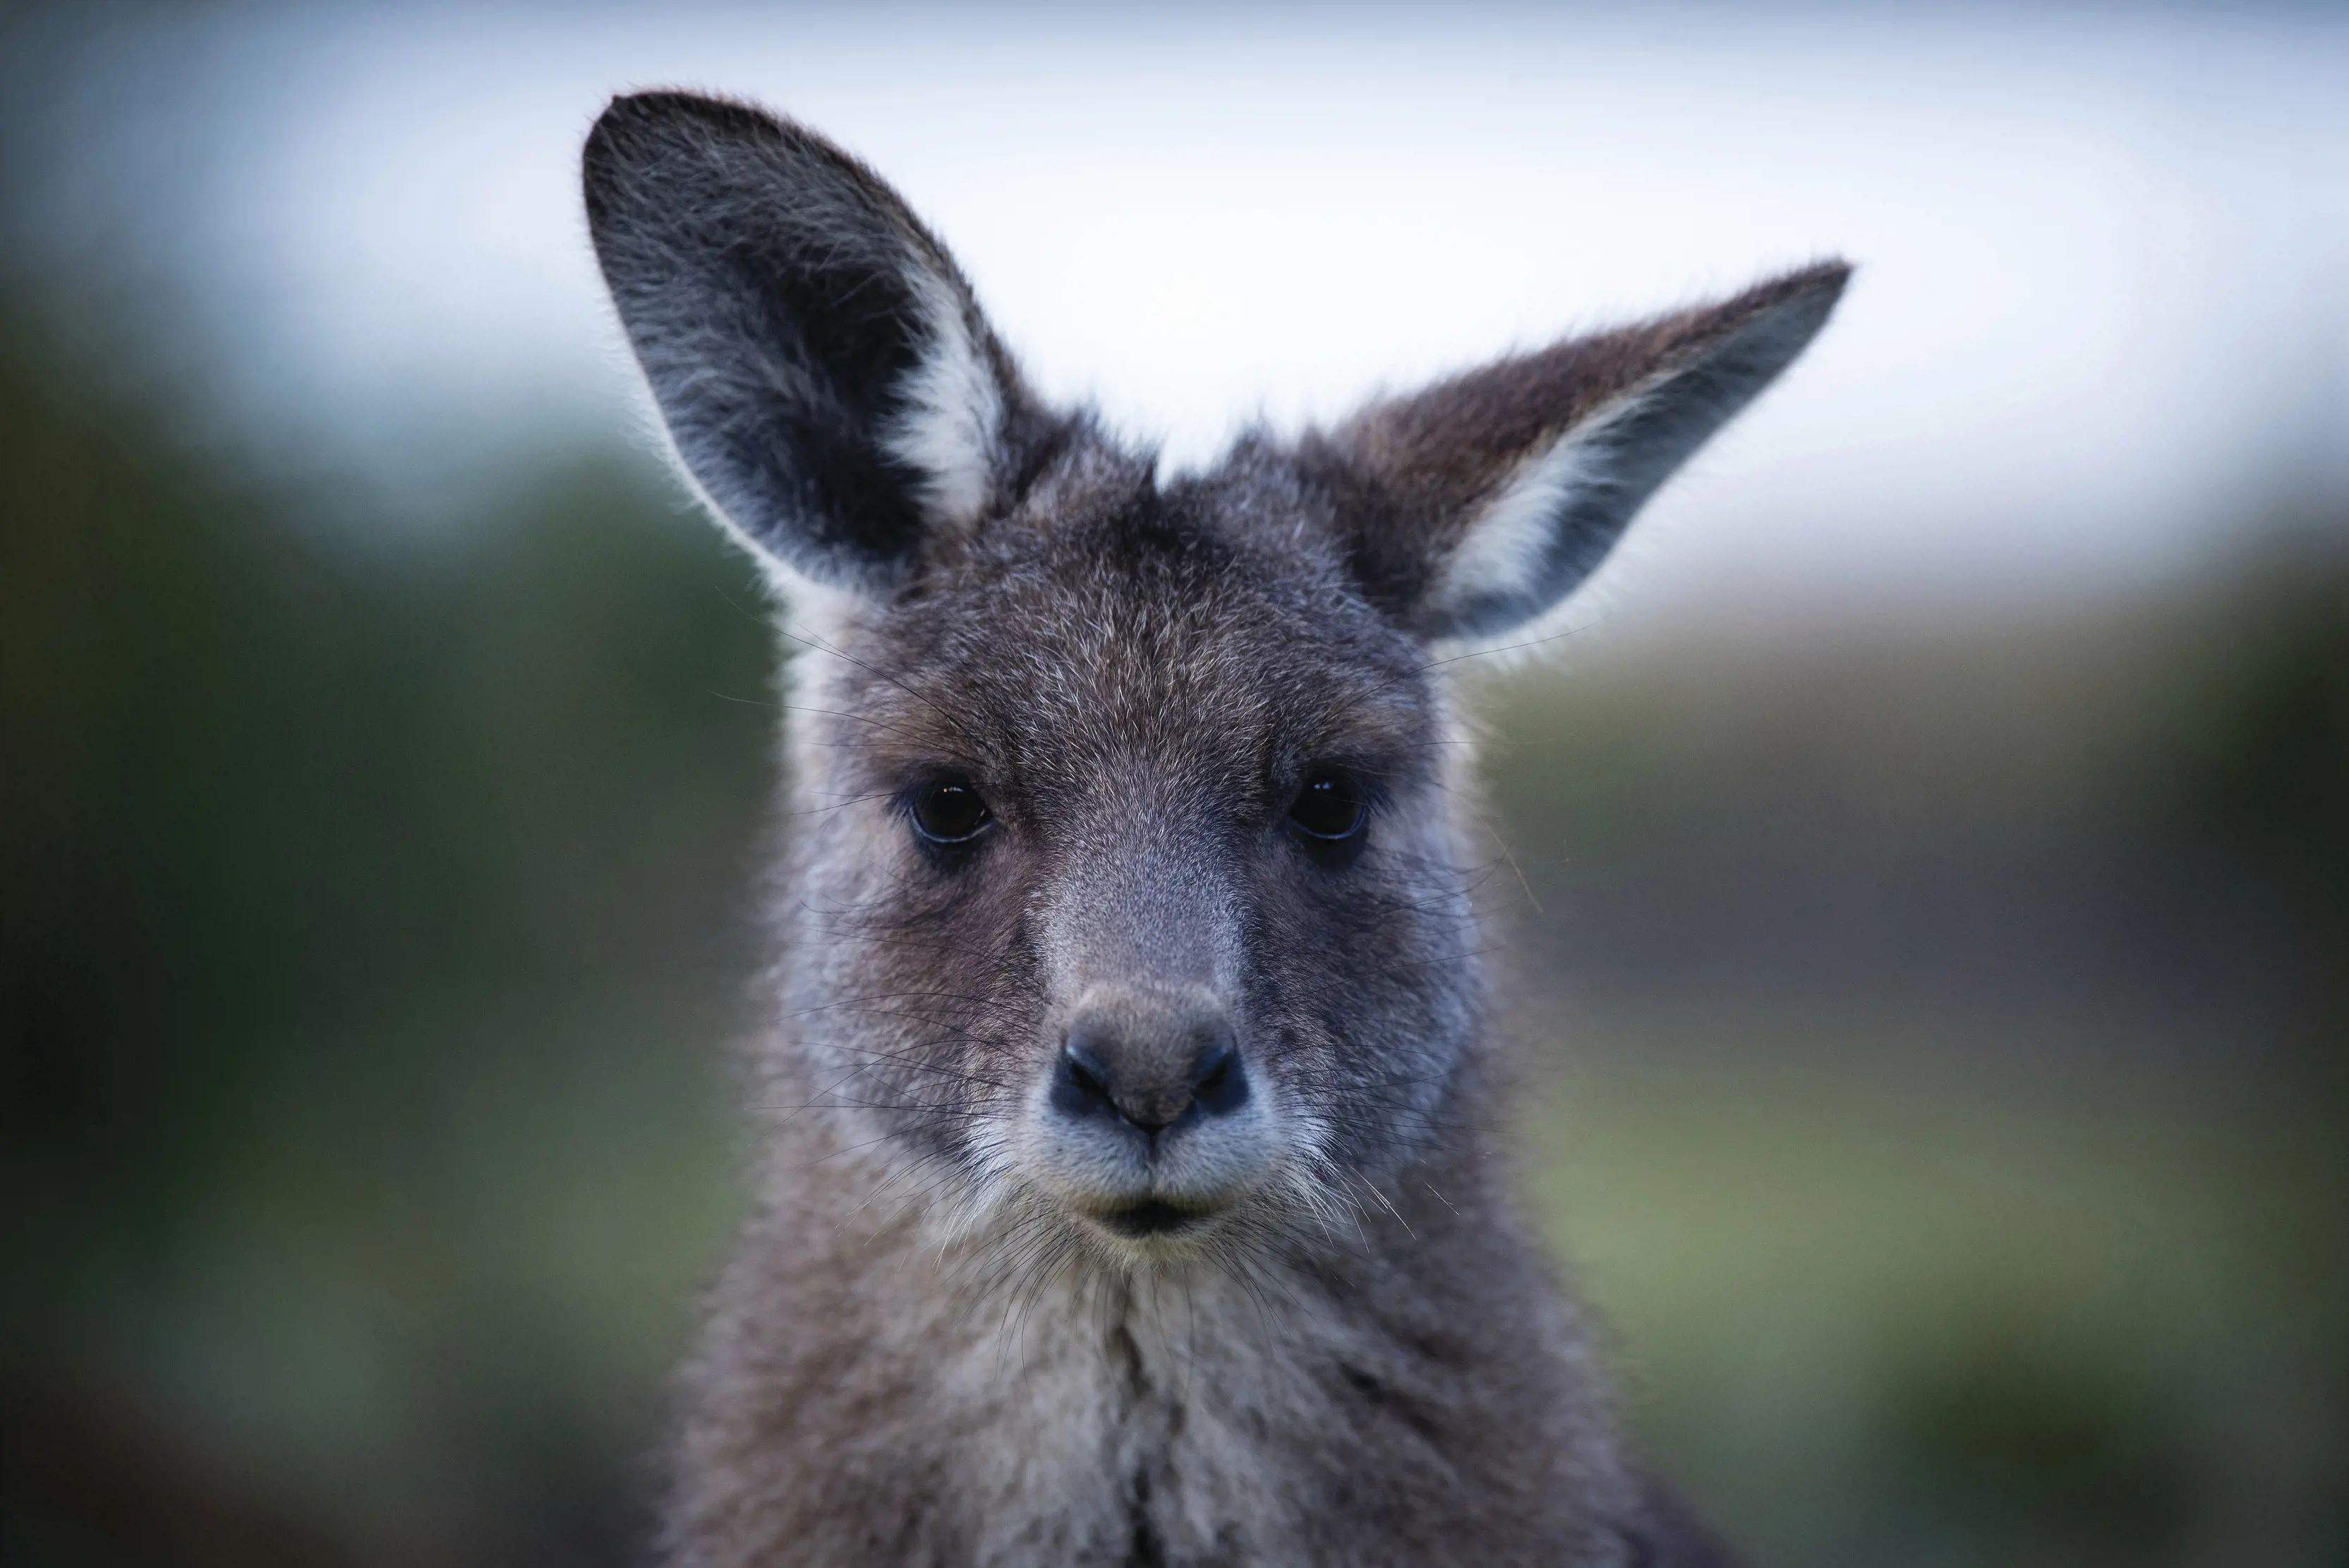 close up of a Kangaroo looking straight at the camera, in the centre of the image.